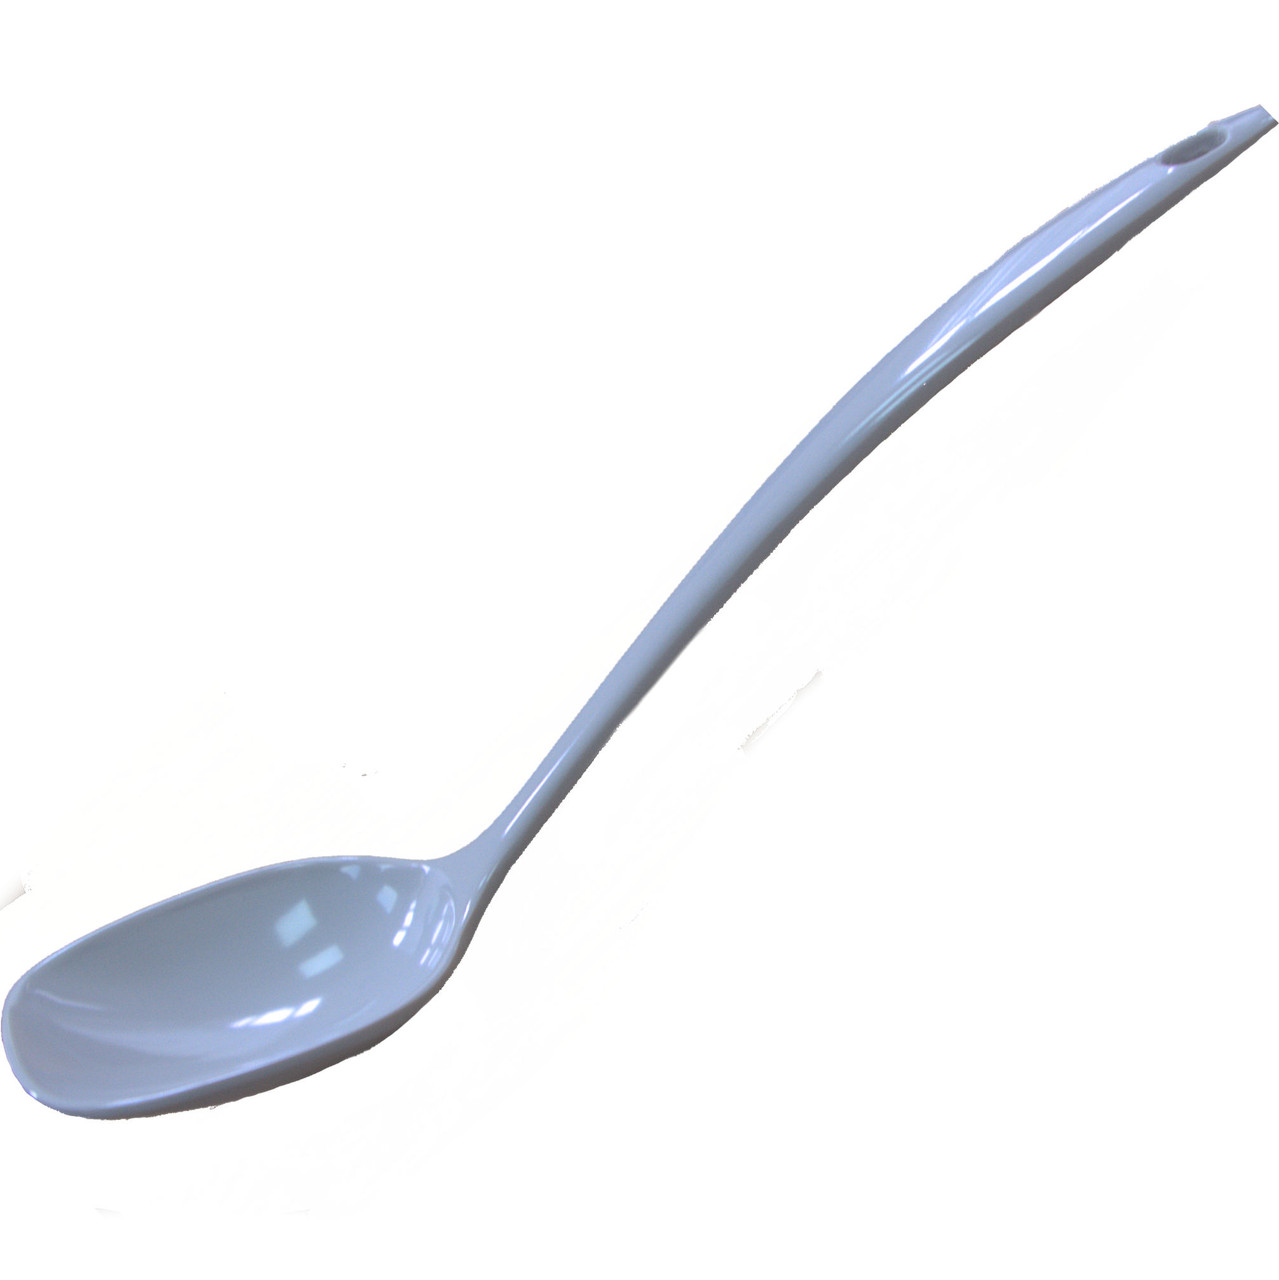 Serving Spoon Melamine White 300 mm / 12 inches Hanging Hole